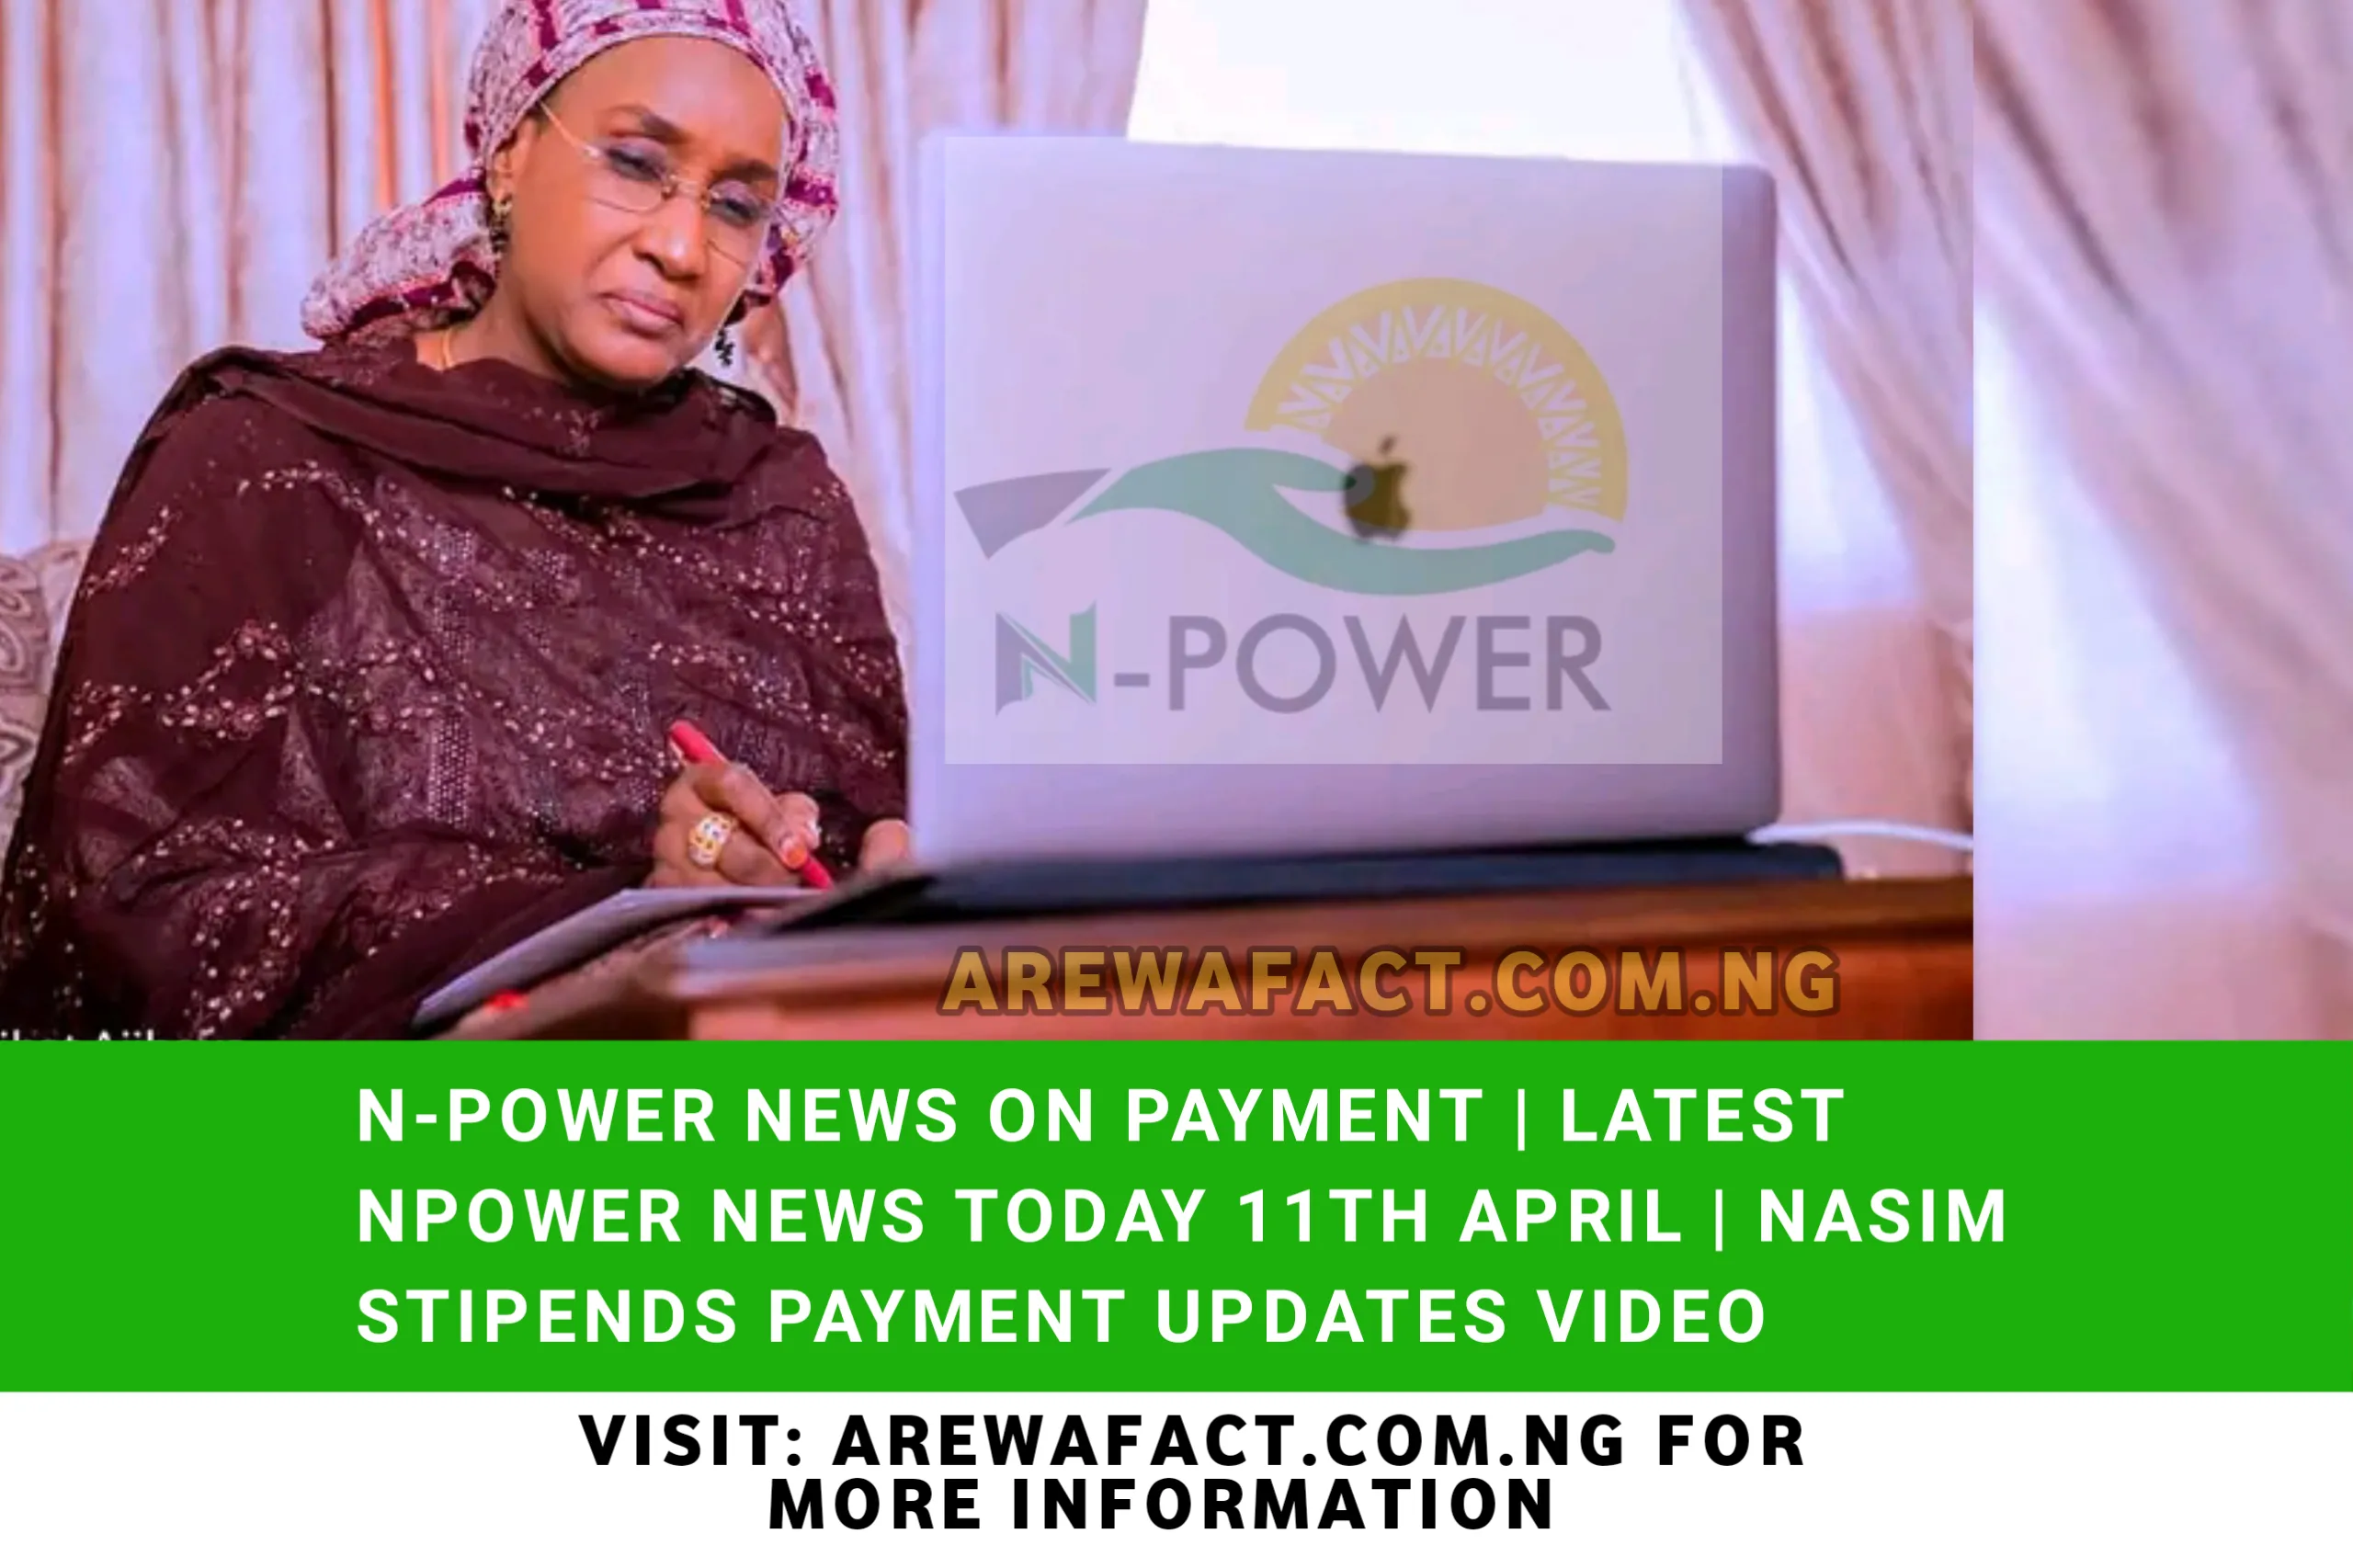 N-Power News on payment